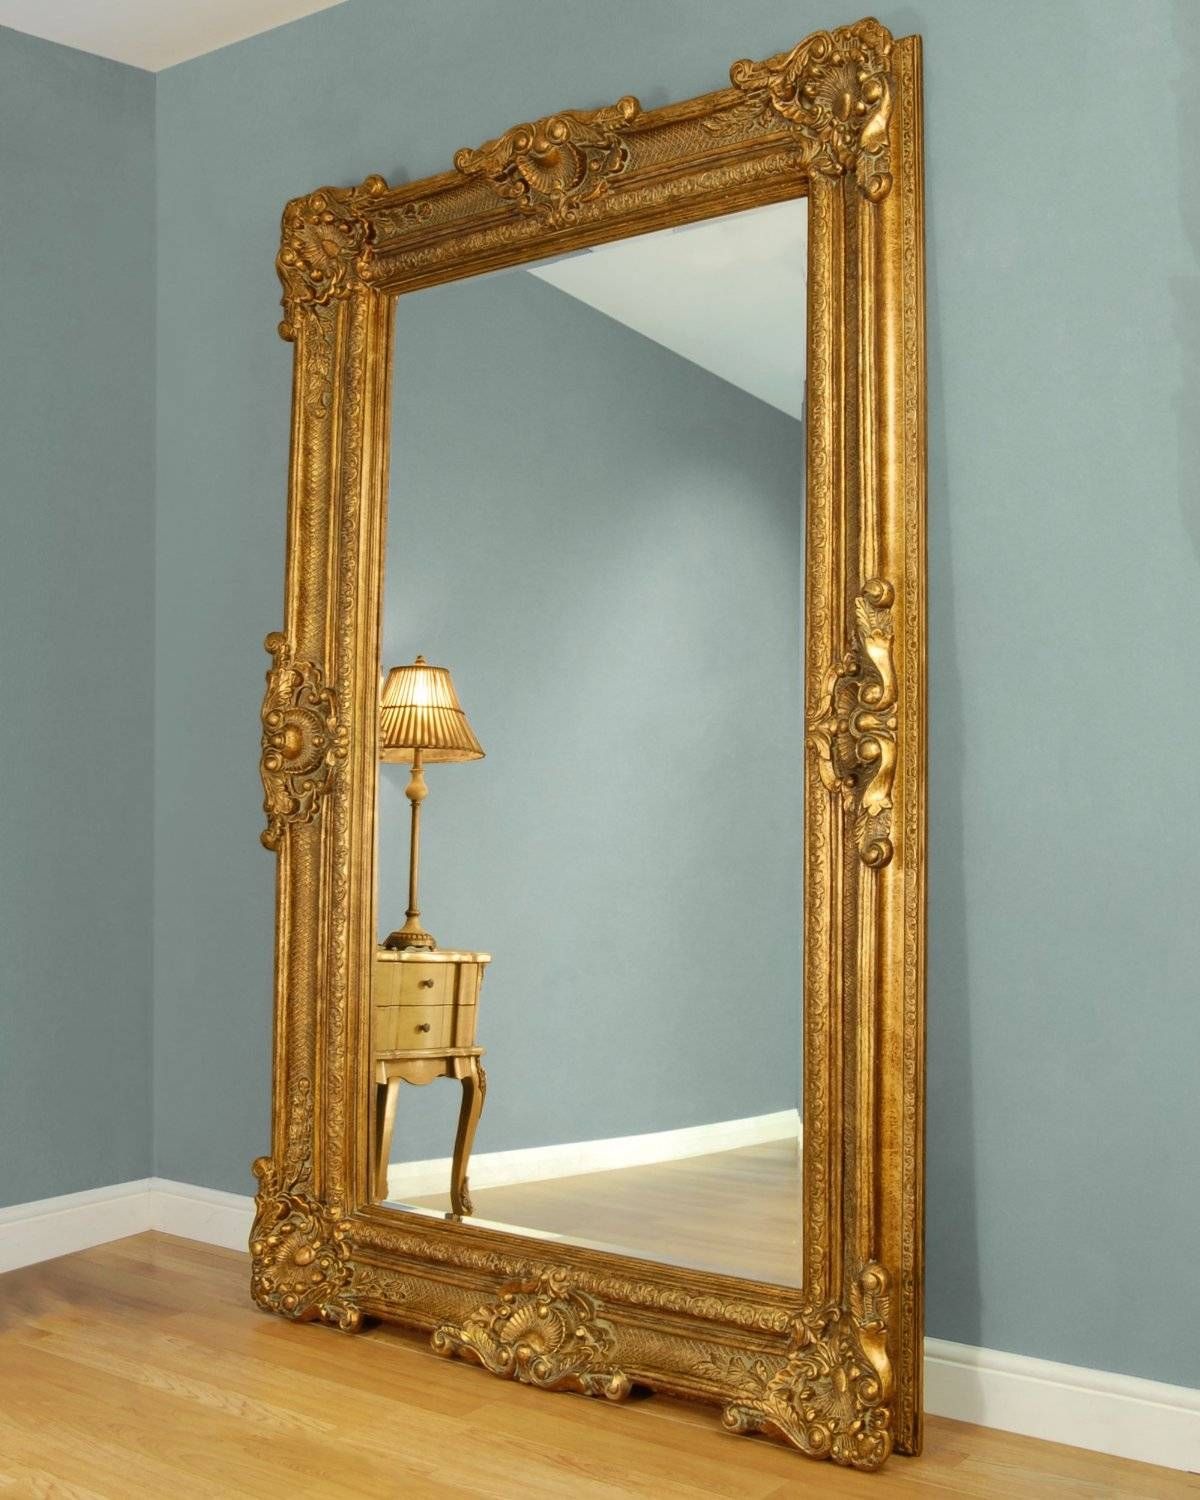 Big Gold Framed Mirrors | Vanity Decoration Inside Large Gold Ornate Mirrors (View 7 of 15)